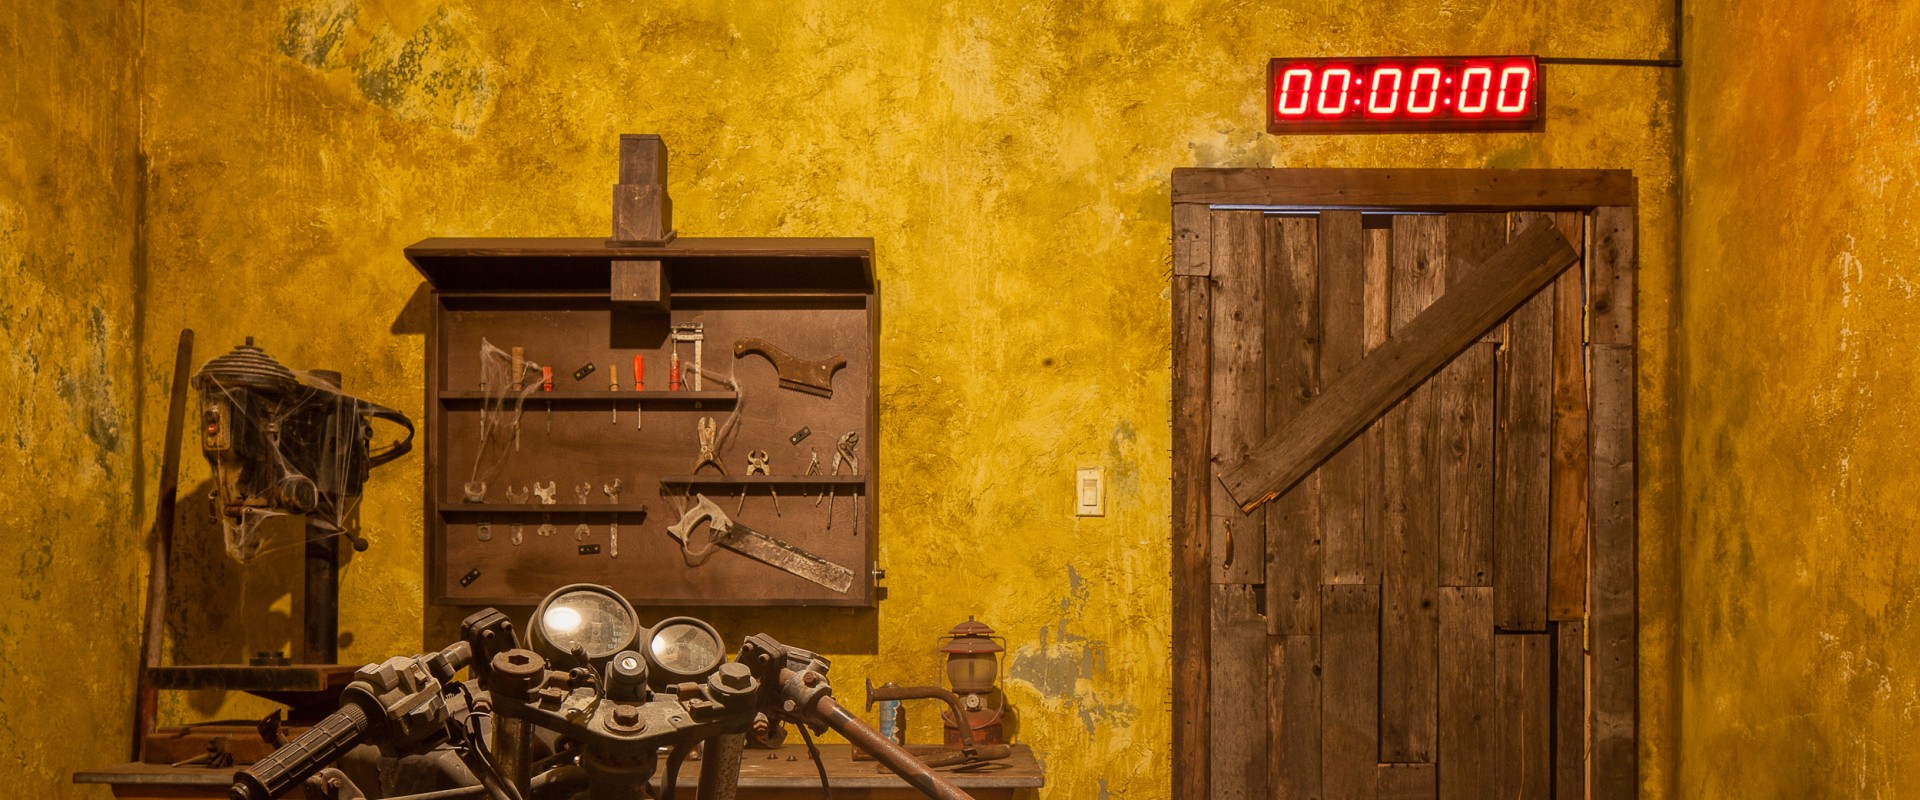 Tips and Strategies for Solving Escape Room Puzzles